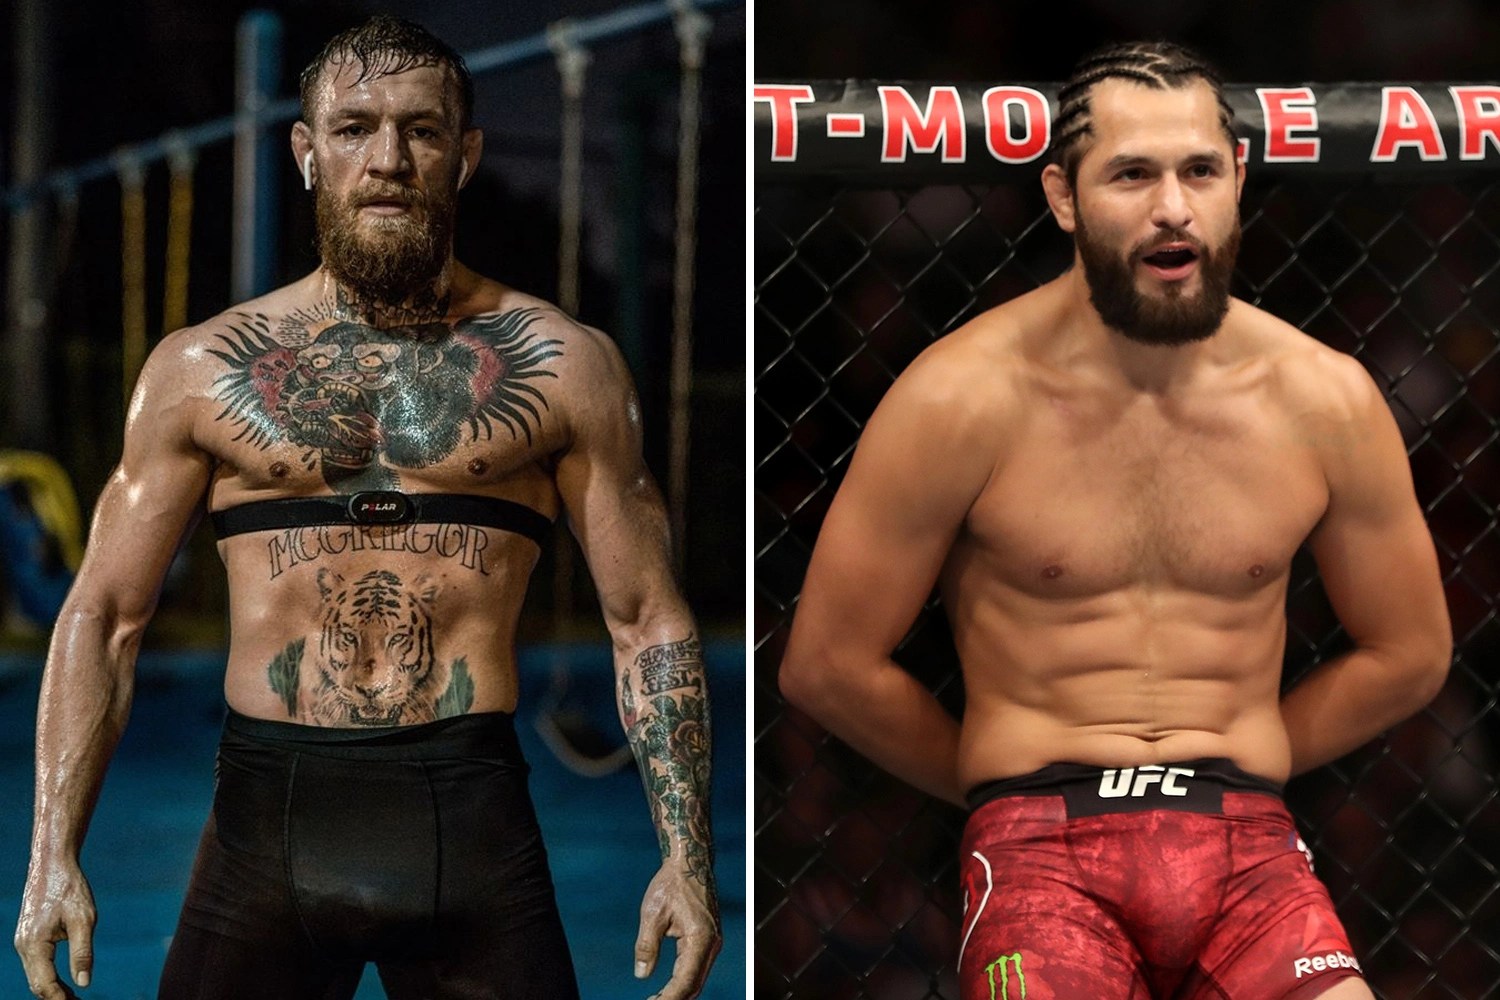 Conor McGregor: The Notorious and Jorge Masvidal heated Twitter exchange, Is this finally heading towards a Rivalry or fight?,UFC news